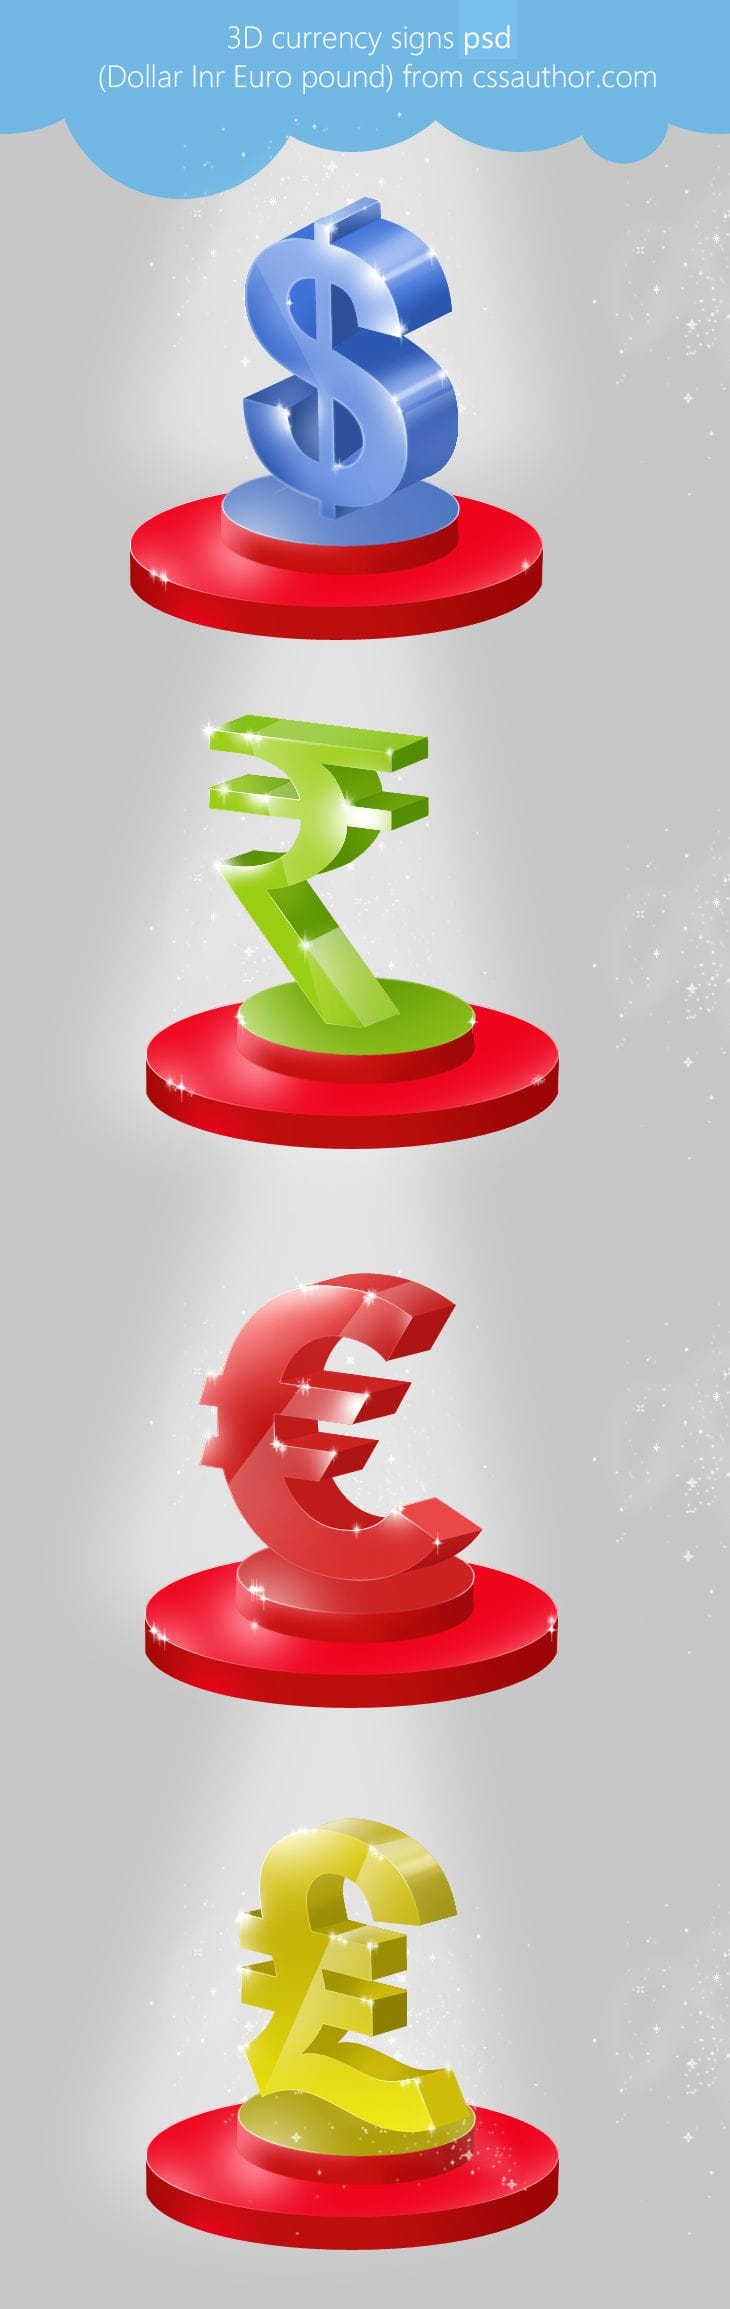 Beautiful 3D Currency Signs PSD for Free Download - cssauthor.com